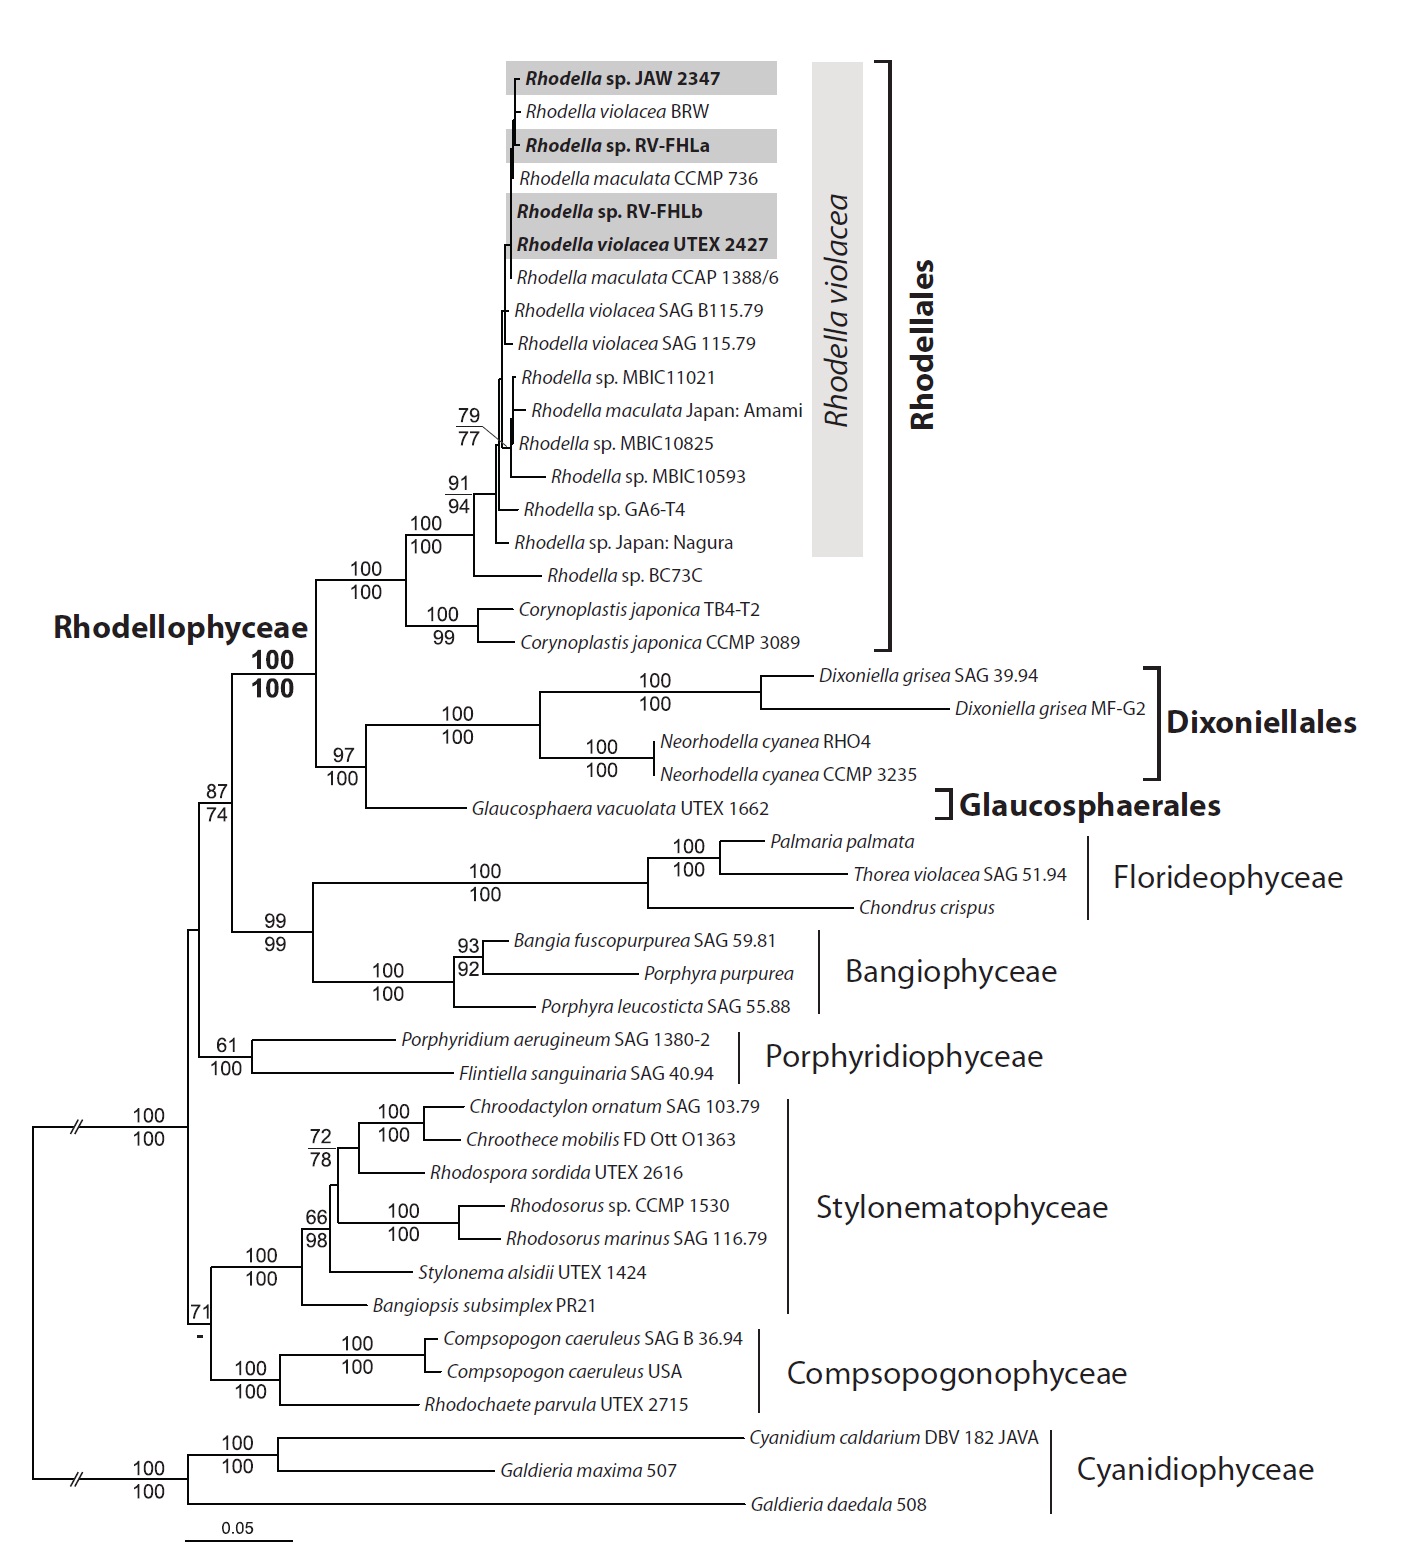 The maximum likelihood phylogeny of Rhodella violacea is based on nuclear small subunit (SSU) rRNA + plastid protein psaA, psbA, and rbcL (-lnL = 26232.95). Likelihood is estimated under the general time reversible (GTR) + G model for the DNA part and separate LG + G + F model for the individual protein gene part. The maximum likelihood (ML) bootstrap support values are shown on the branches (from DNA + protein mixed data) and under branch (from DNA data).